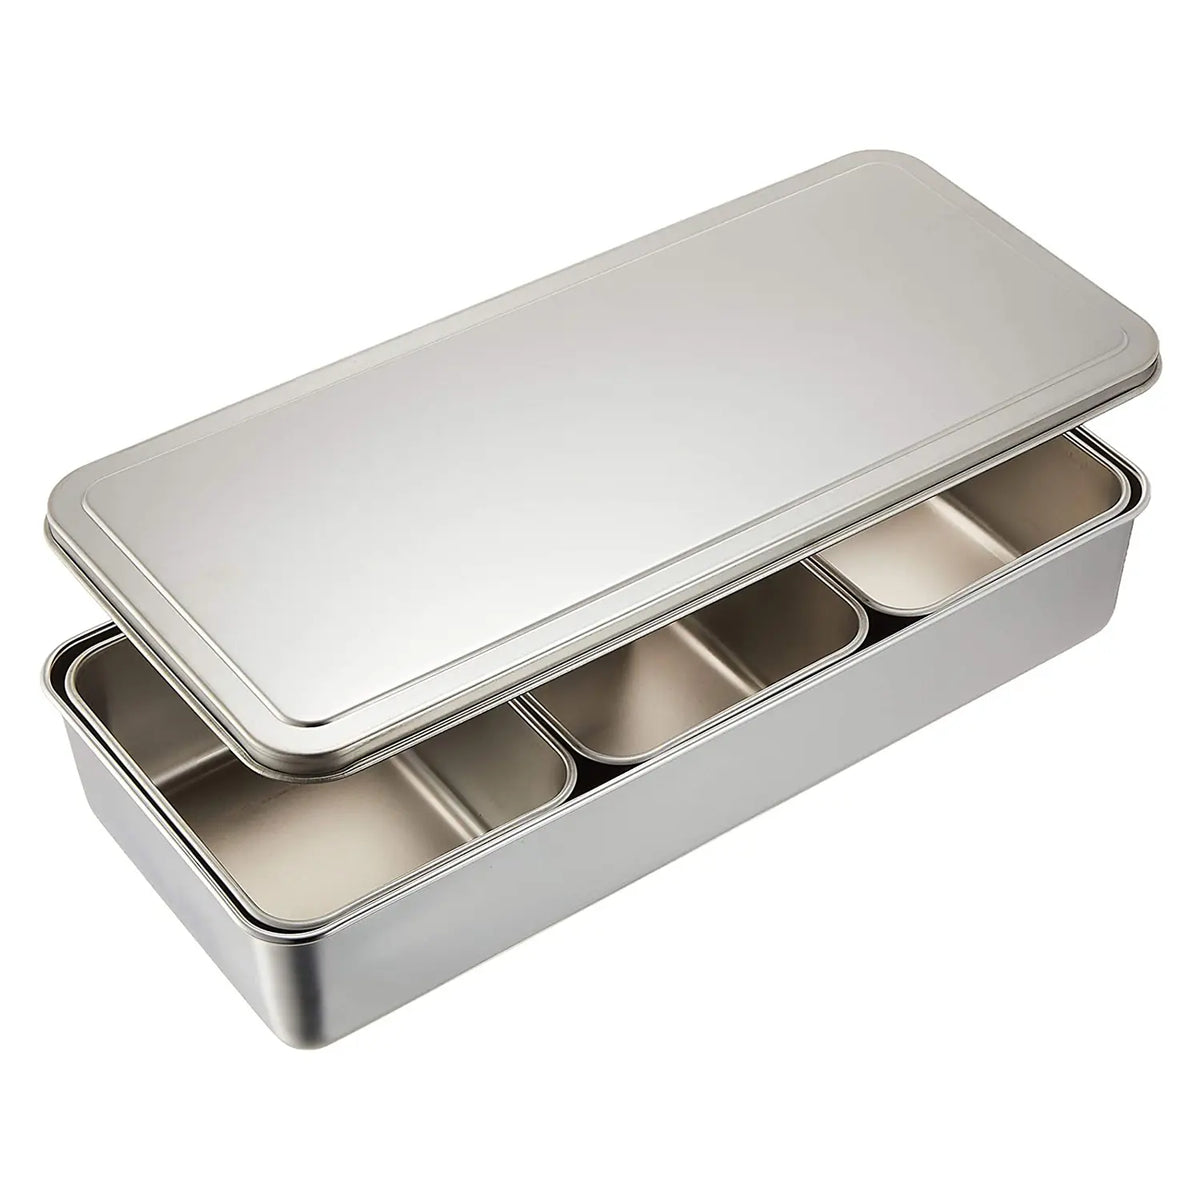 Stainless Yakumi Pan Seasoning Container w/3 Compartments Silver Arrow Japan